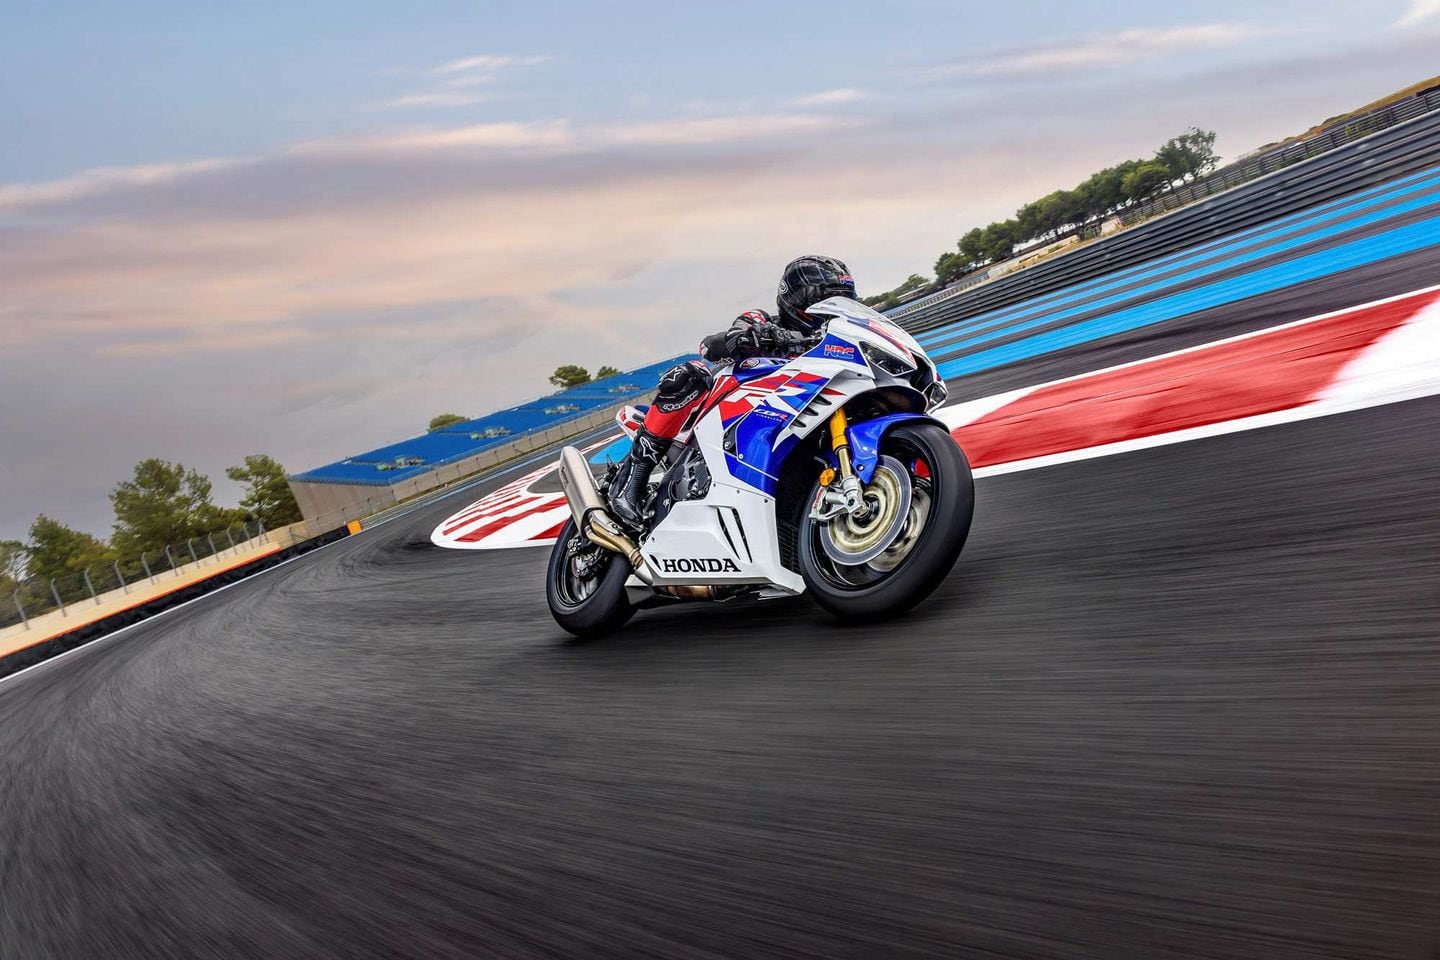 The Fireblade SP is agile yet composed and stable around a racetrack, with great front-end feel.